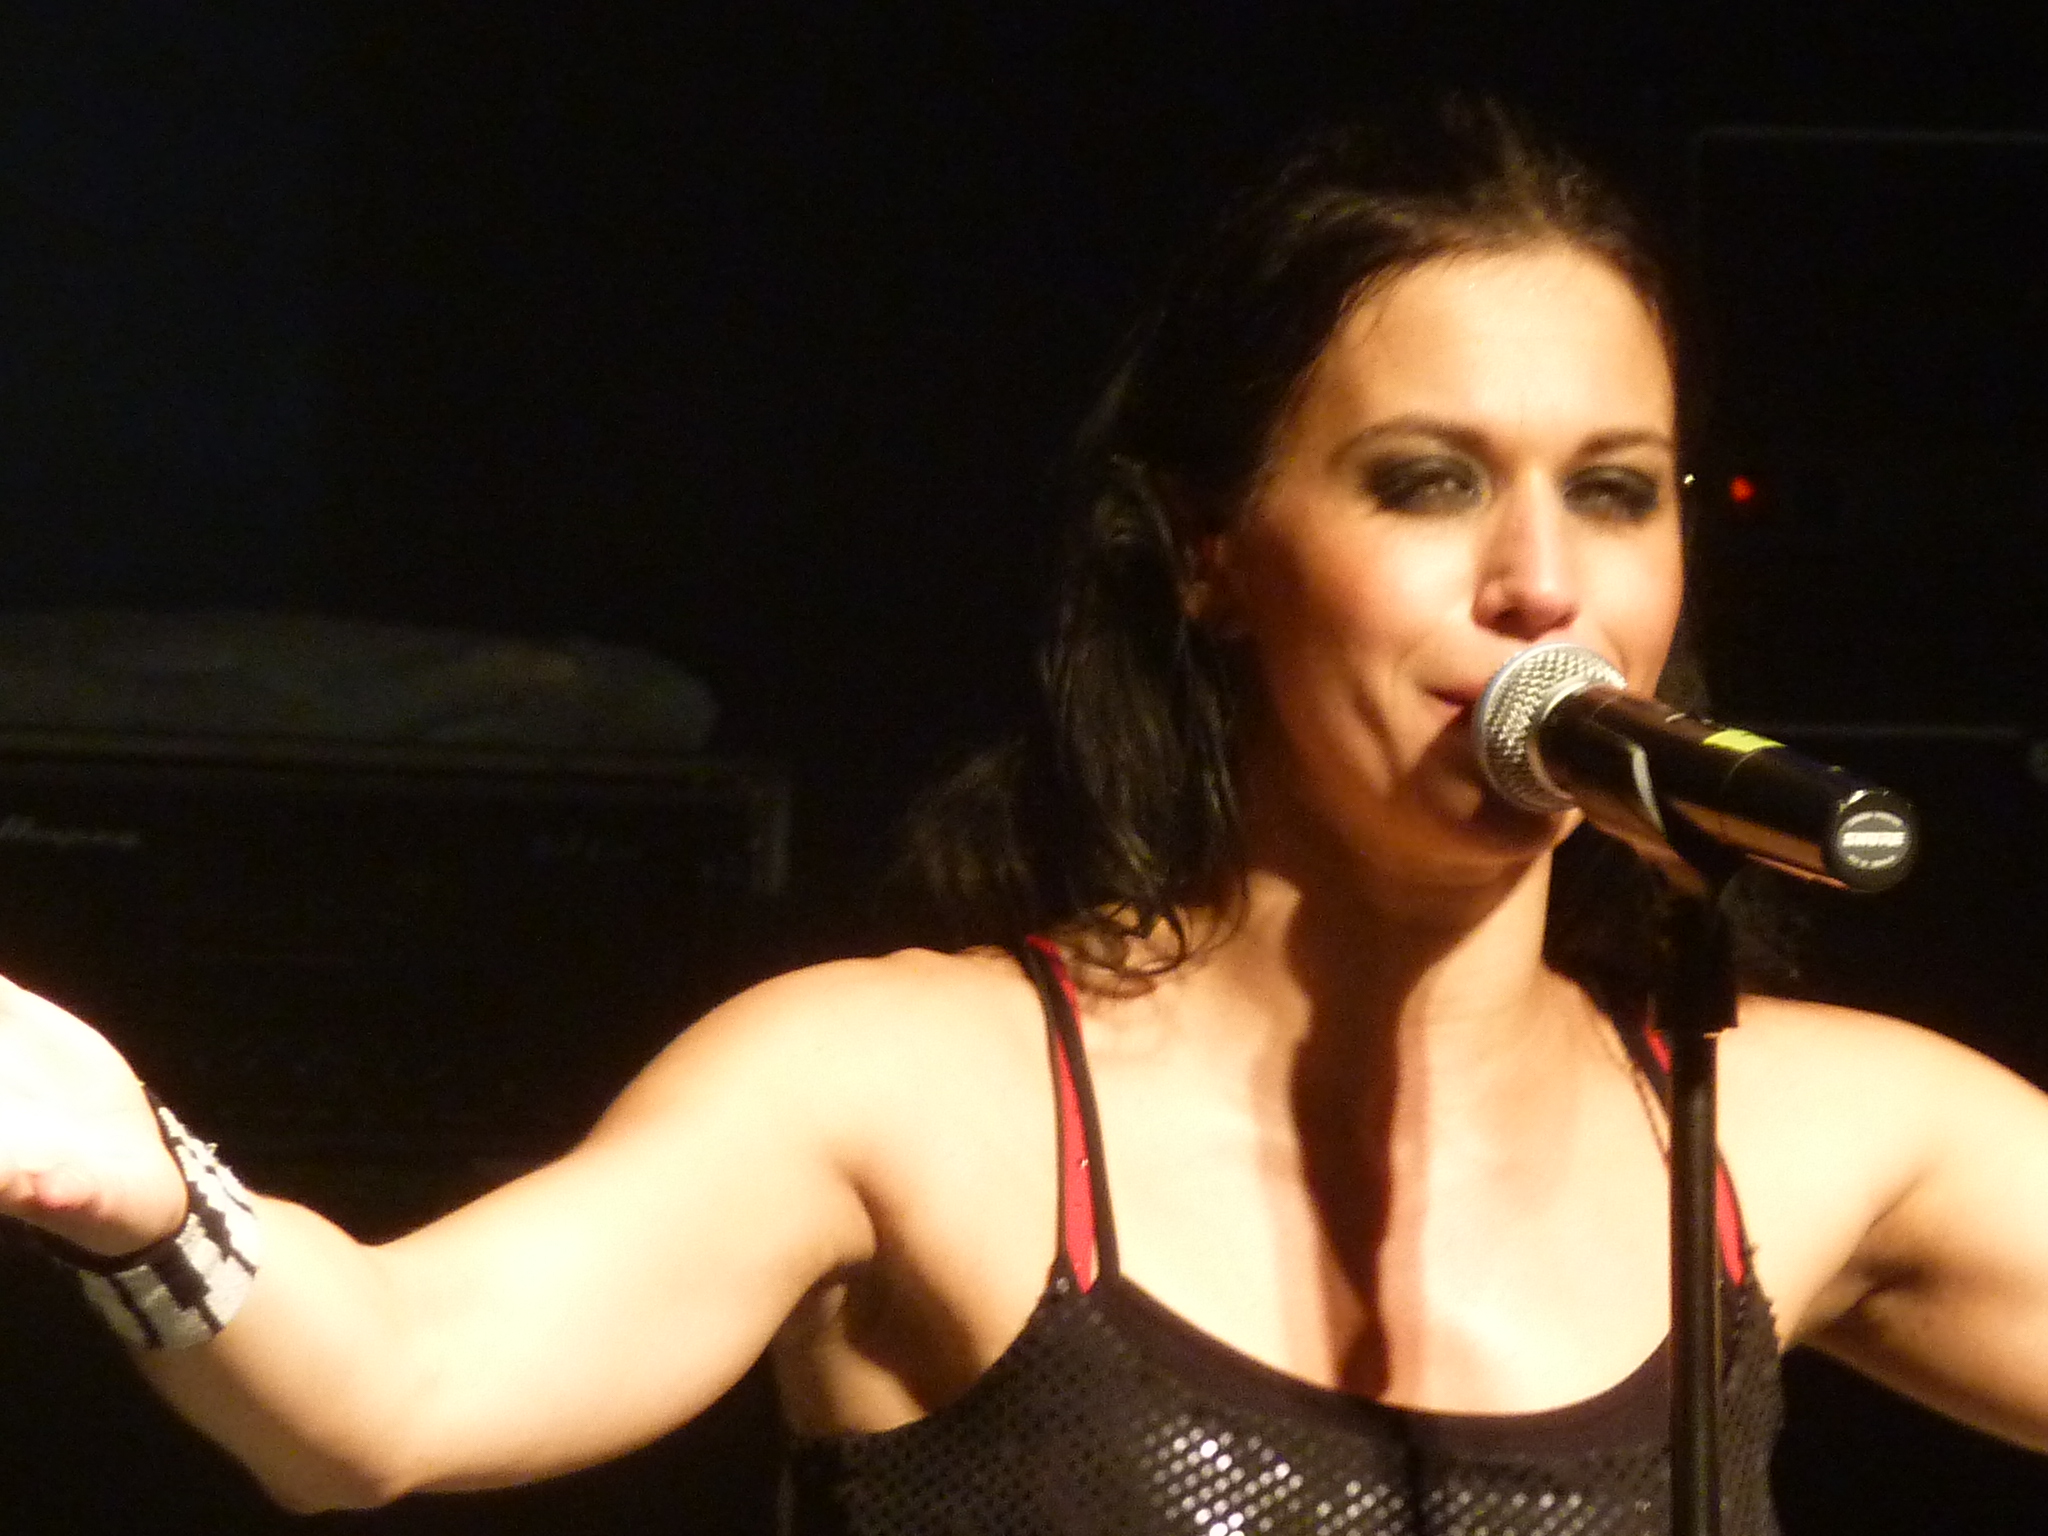 a woman with her arms extended and a microphone up in the air